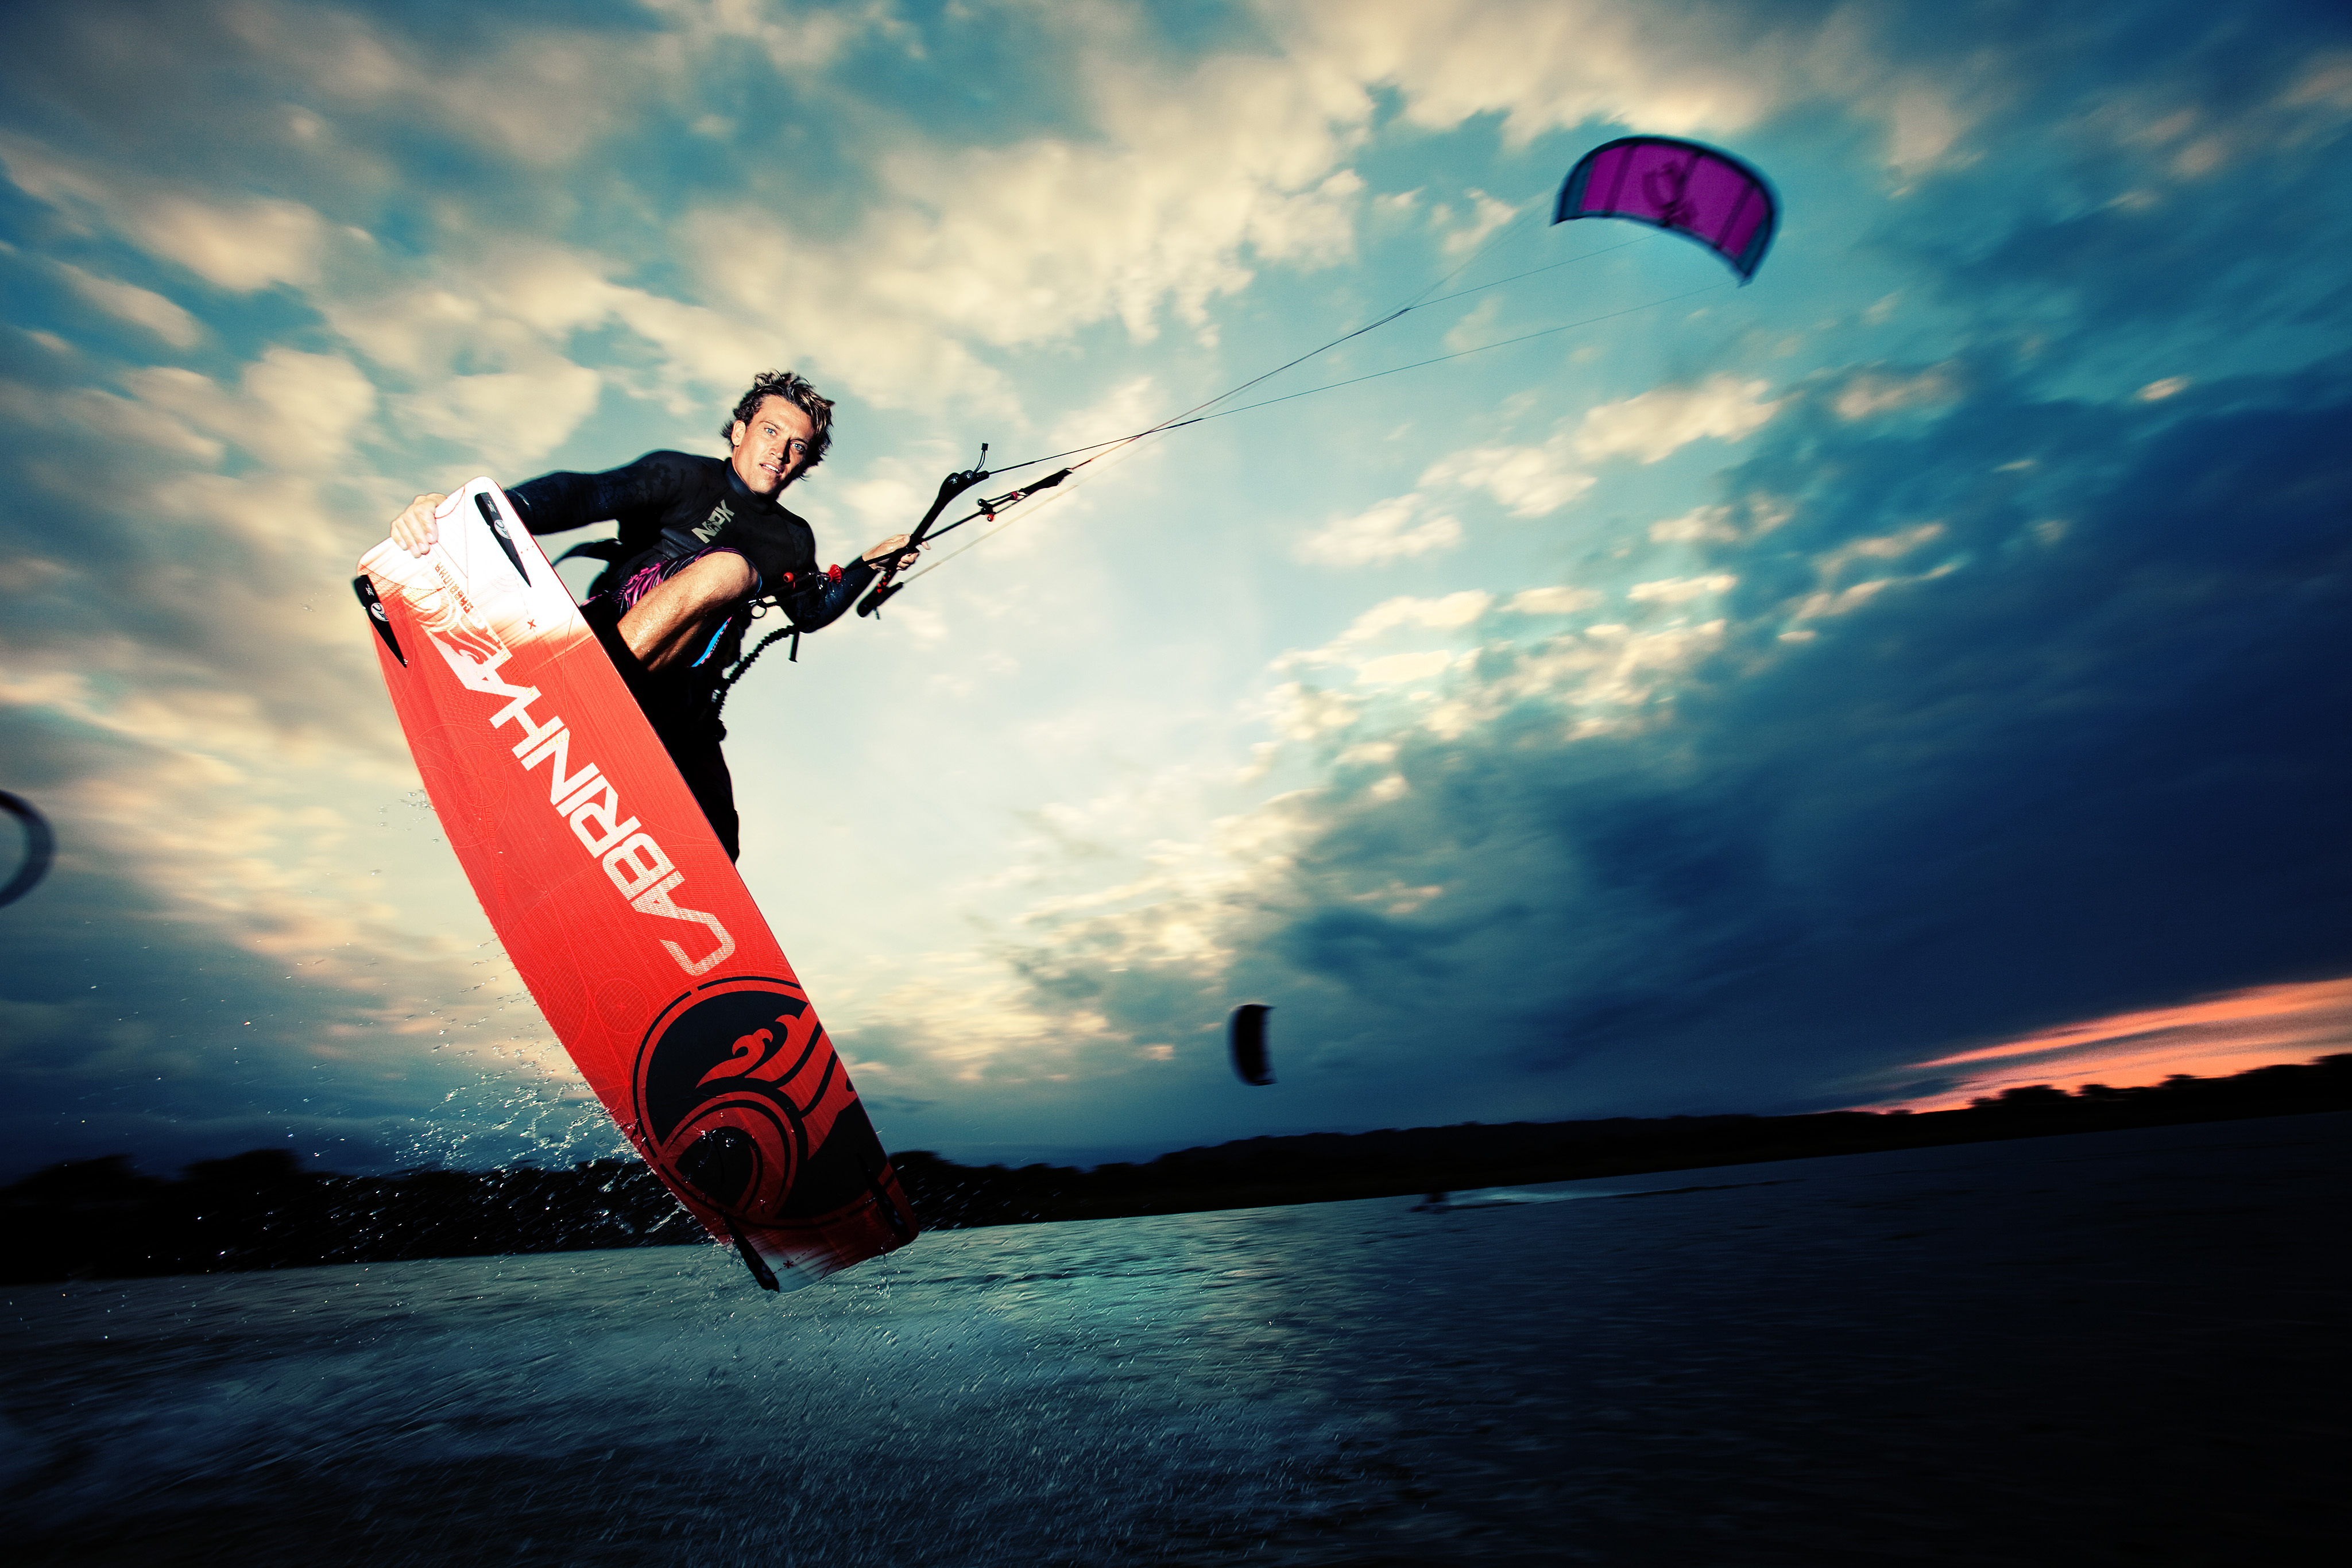 kitesurf wallpaper image - Damien LeRoy with a tailgrab at dusk on his Cabrinha kites gear - in resolution: Original 4096 X 2731